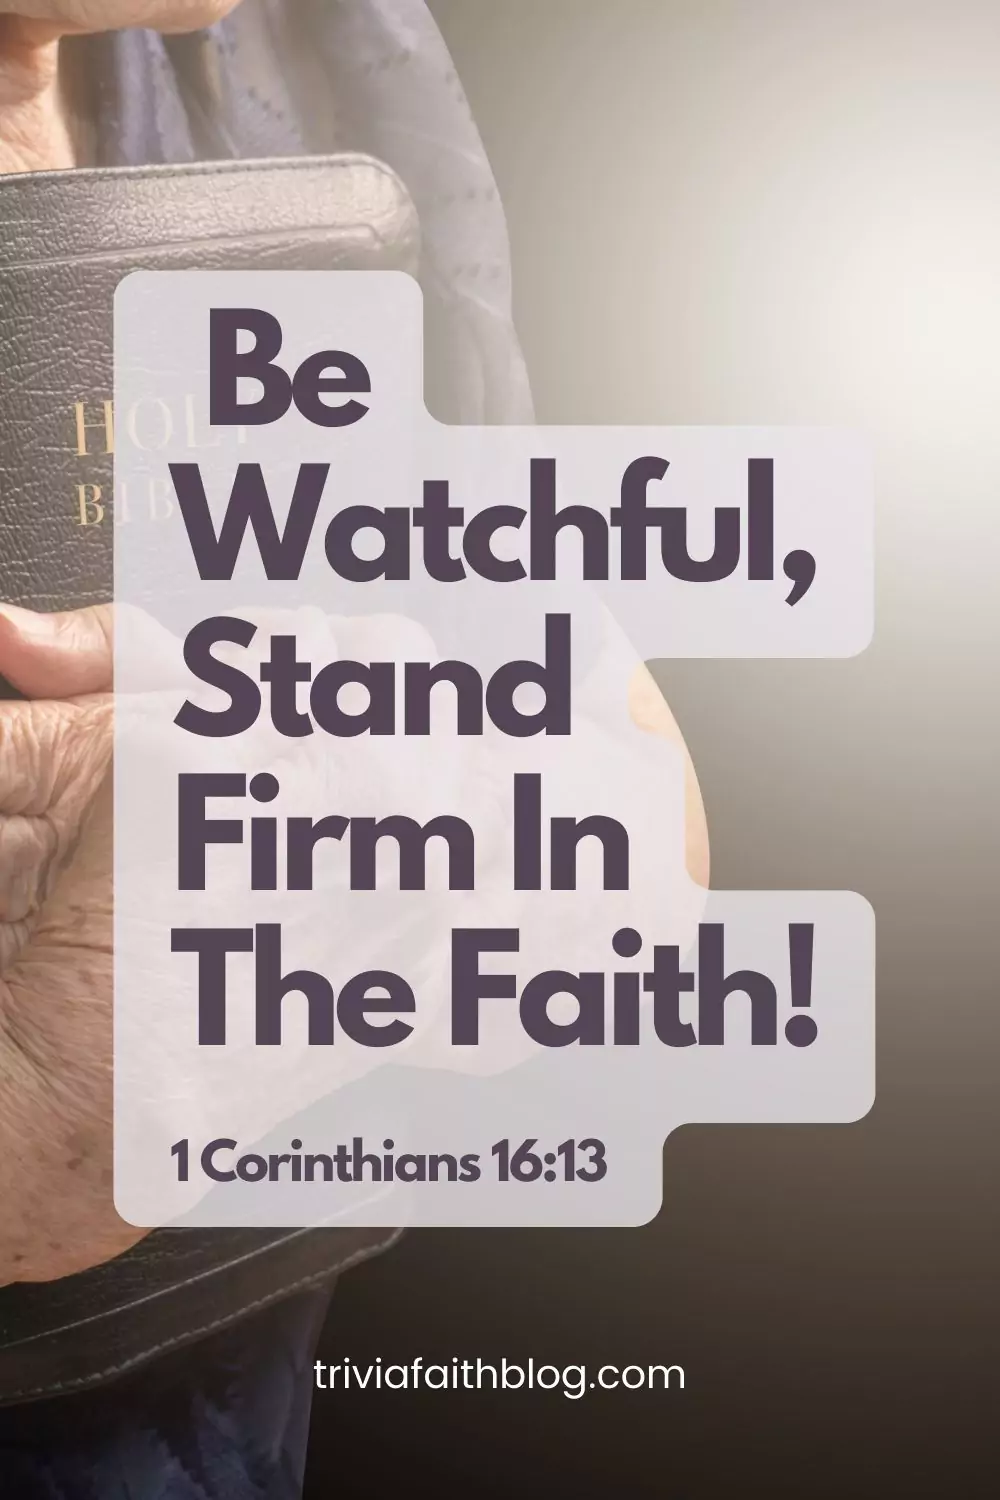 Watch ye, stand fast in the faith, quit you like men, be strong. (KJV)

Be watchful, stand firm in the faith, act like men, be strong. (ESV)

Be on guard. Stand firm in the faith. Be courageous. Be strong. (NLT)

Be alert, stand firm in the faith, be brave, be strong. (NIV)

Be on the alert, stand firm in the faith, act like men, be strong. (NASB)

Be watchful, stand firm in the faith, be courageous, be strong. (CSB)